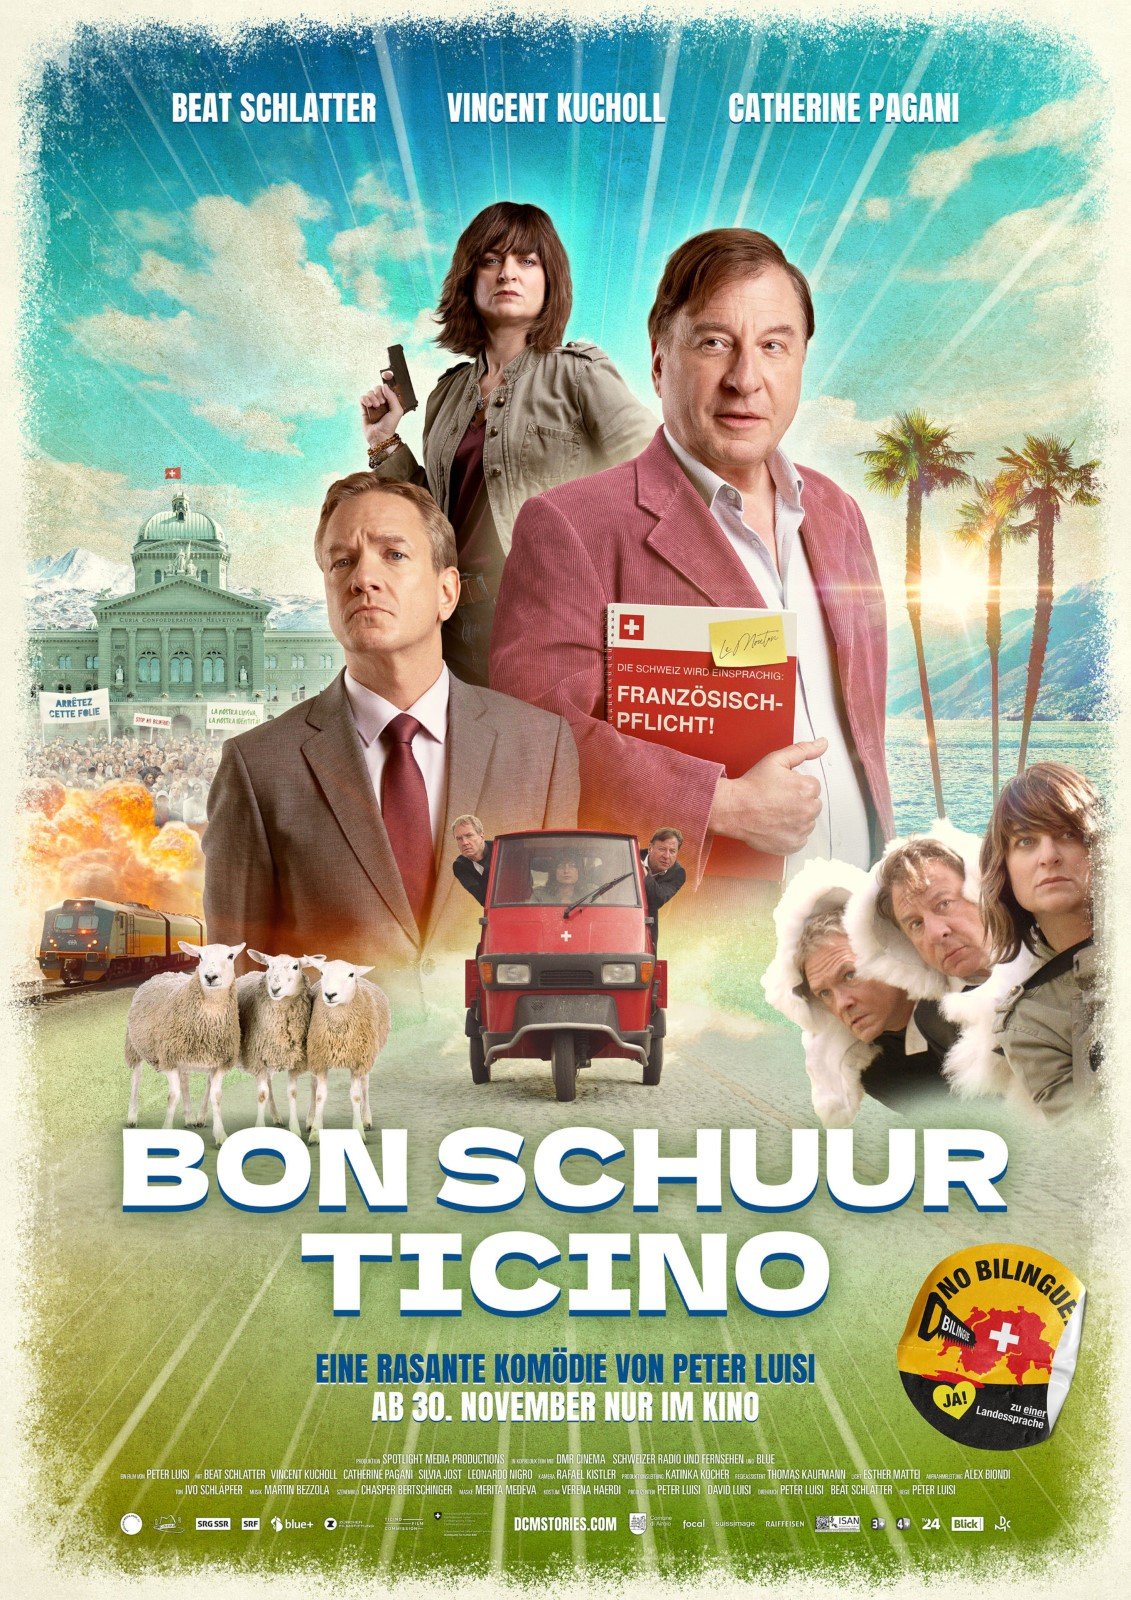 Bon Schuur Ticino (Bonjour Switzerland) showing in our47-seat theatre at 1PM & 3PM)